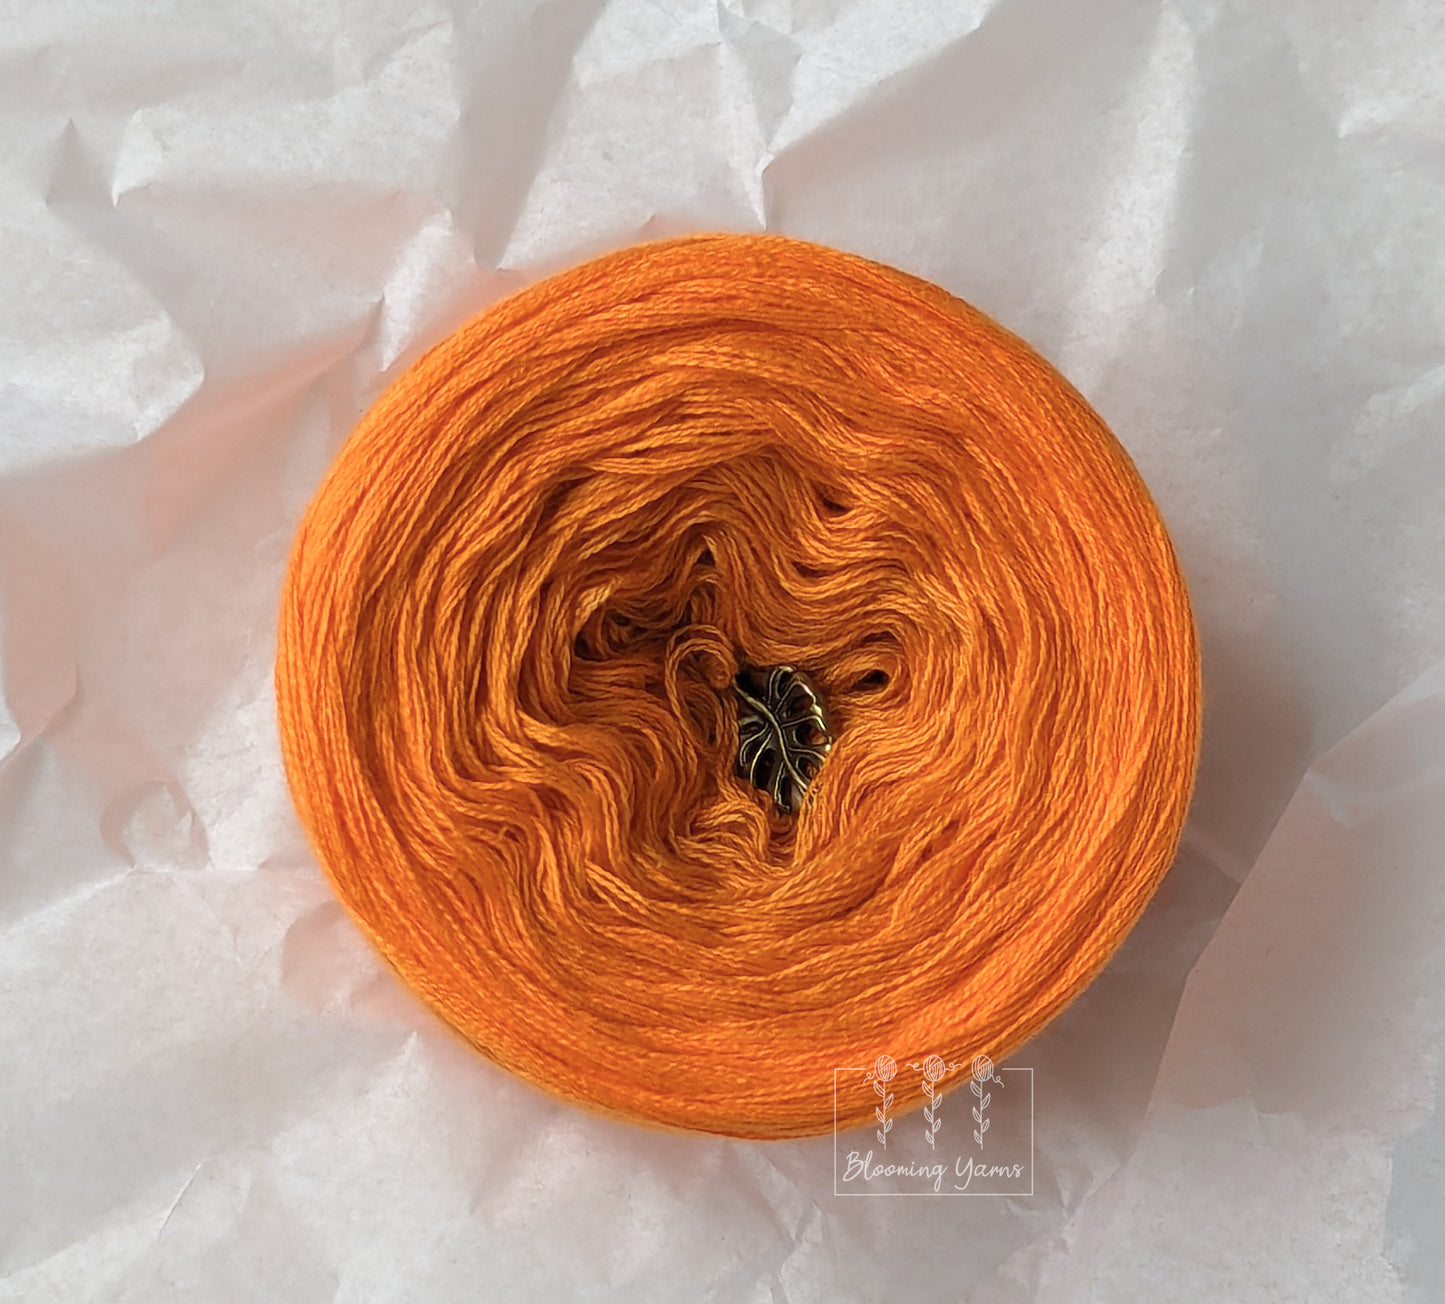 C327 cotton/acrylic ombre yarn cake, normal style, 100g, about 500m, 3ply